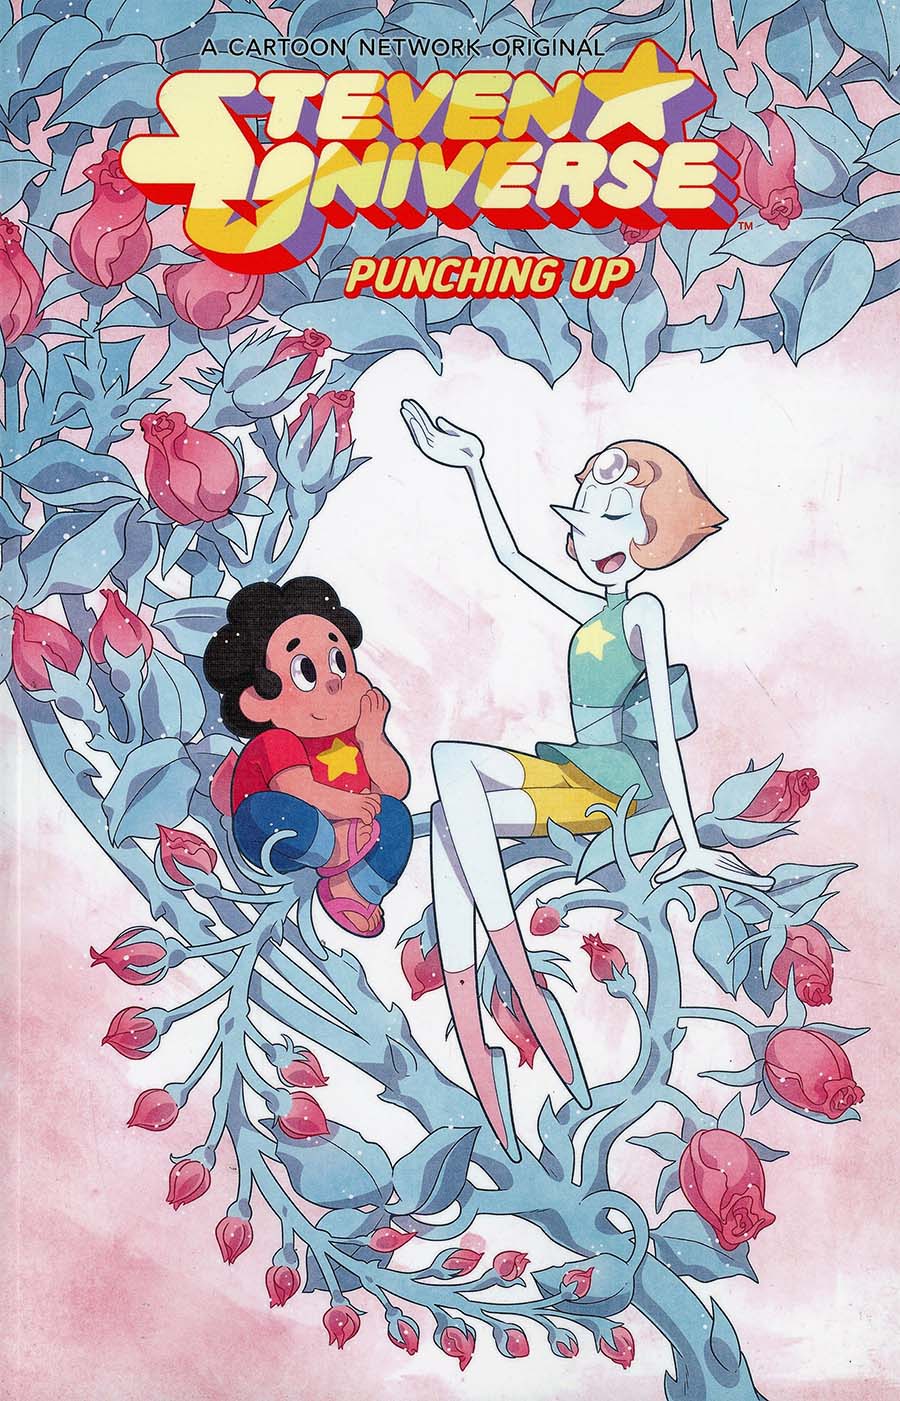 Steven Universe Ongoing Vol 2 Punching Up TP